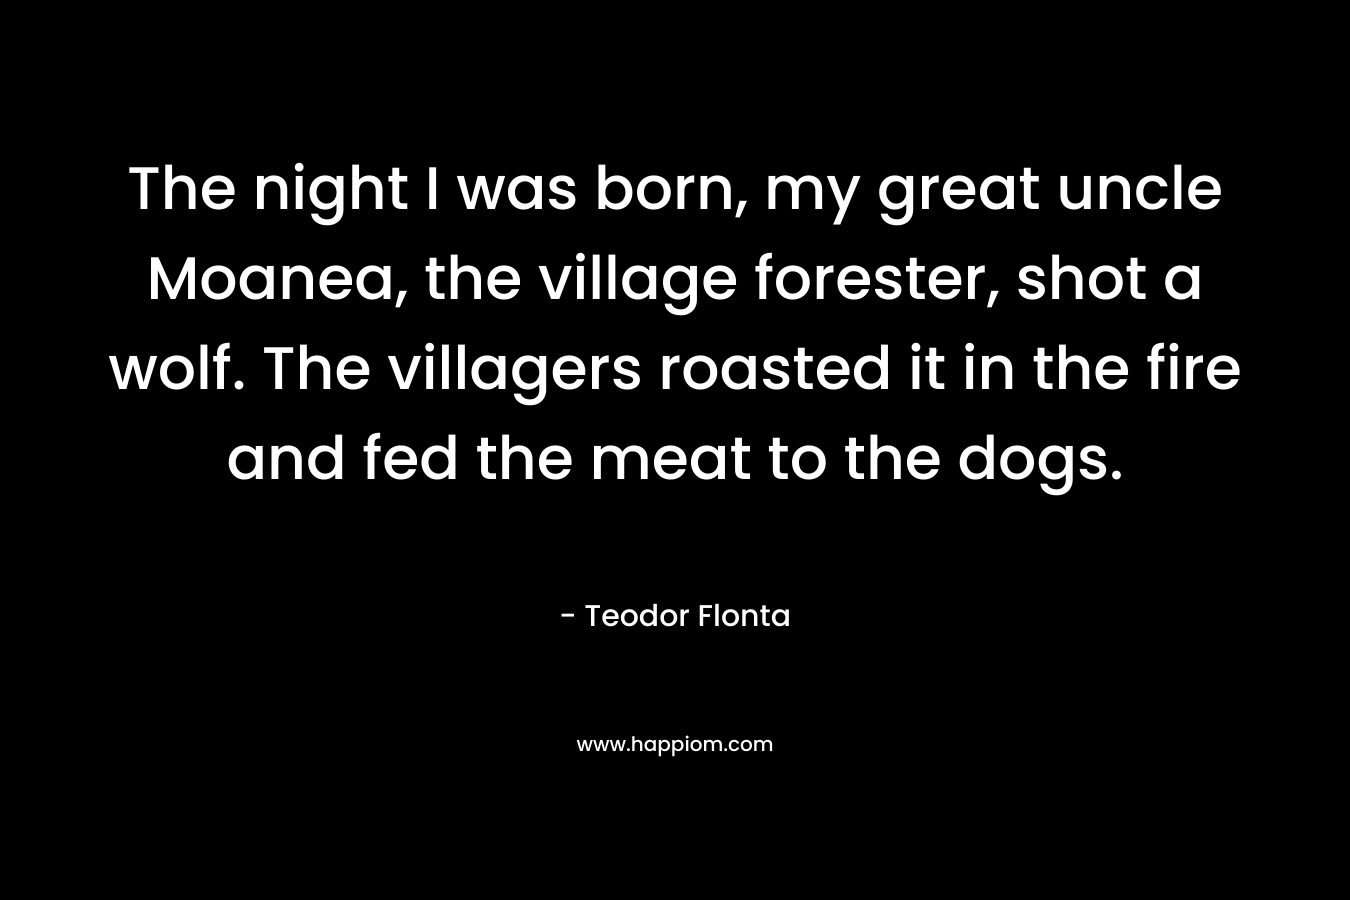 The night I was born, my great uncle Moanea, the village forester, shot a wolf. The villagers roasted it in the fire and fed the meat to the dogs. – Teodor Flonta